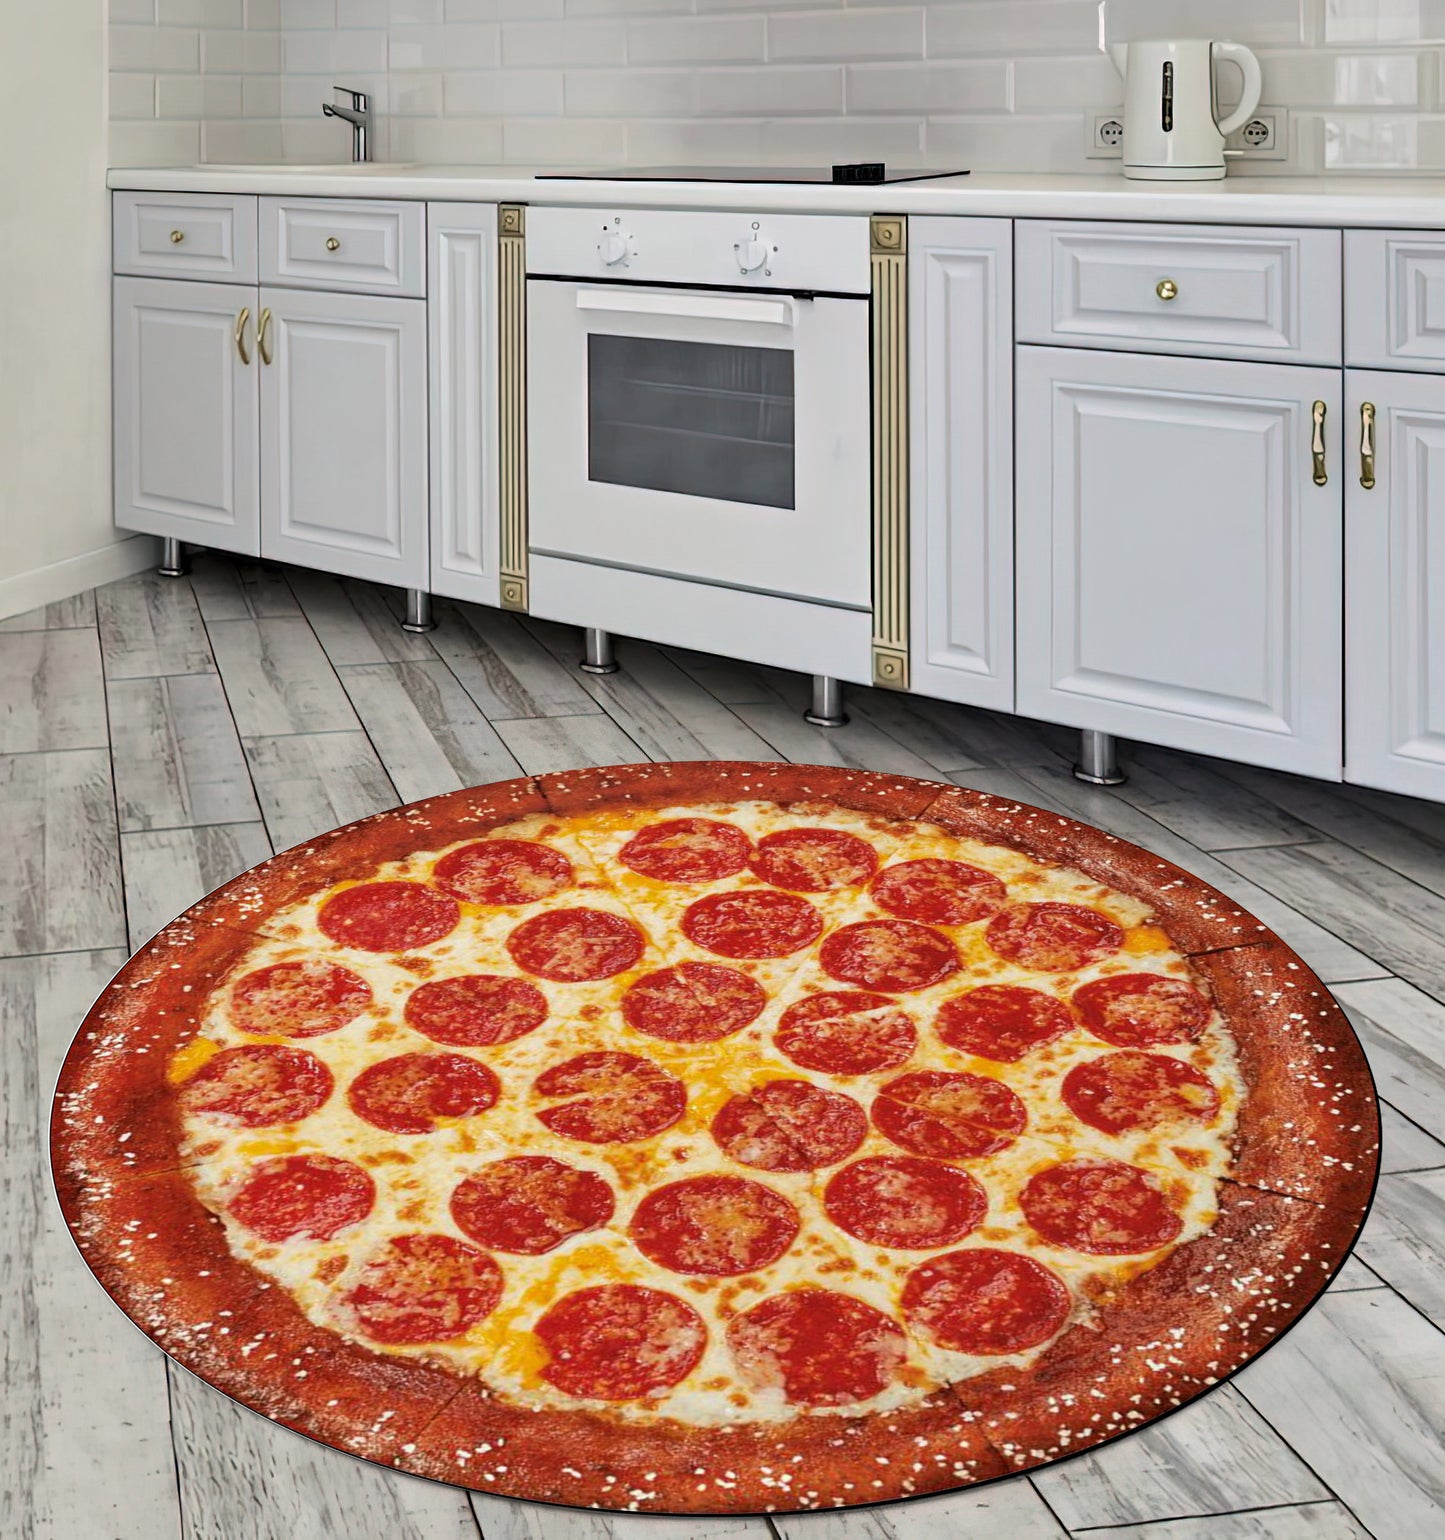 3D Pizza Rug, Kitchen Decor, Dining Room Round Mat, Real Looking Pizza Carpet